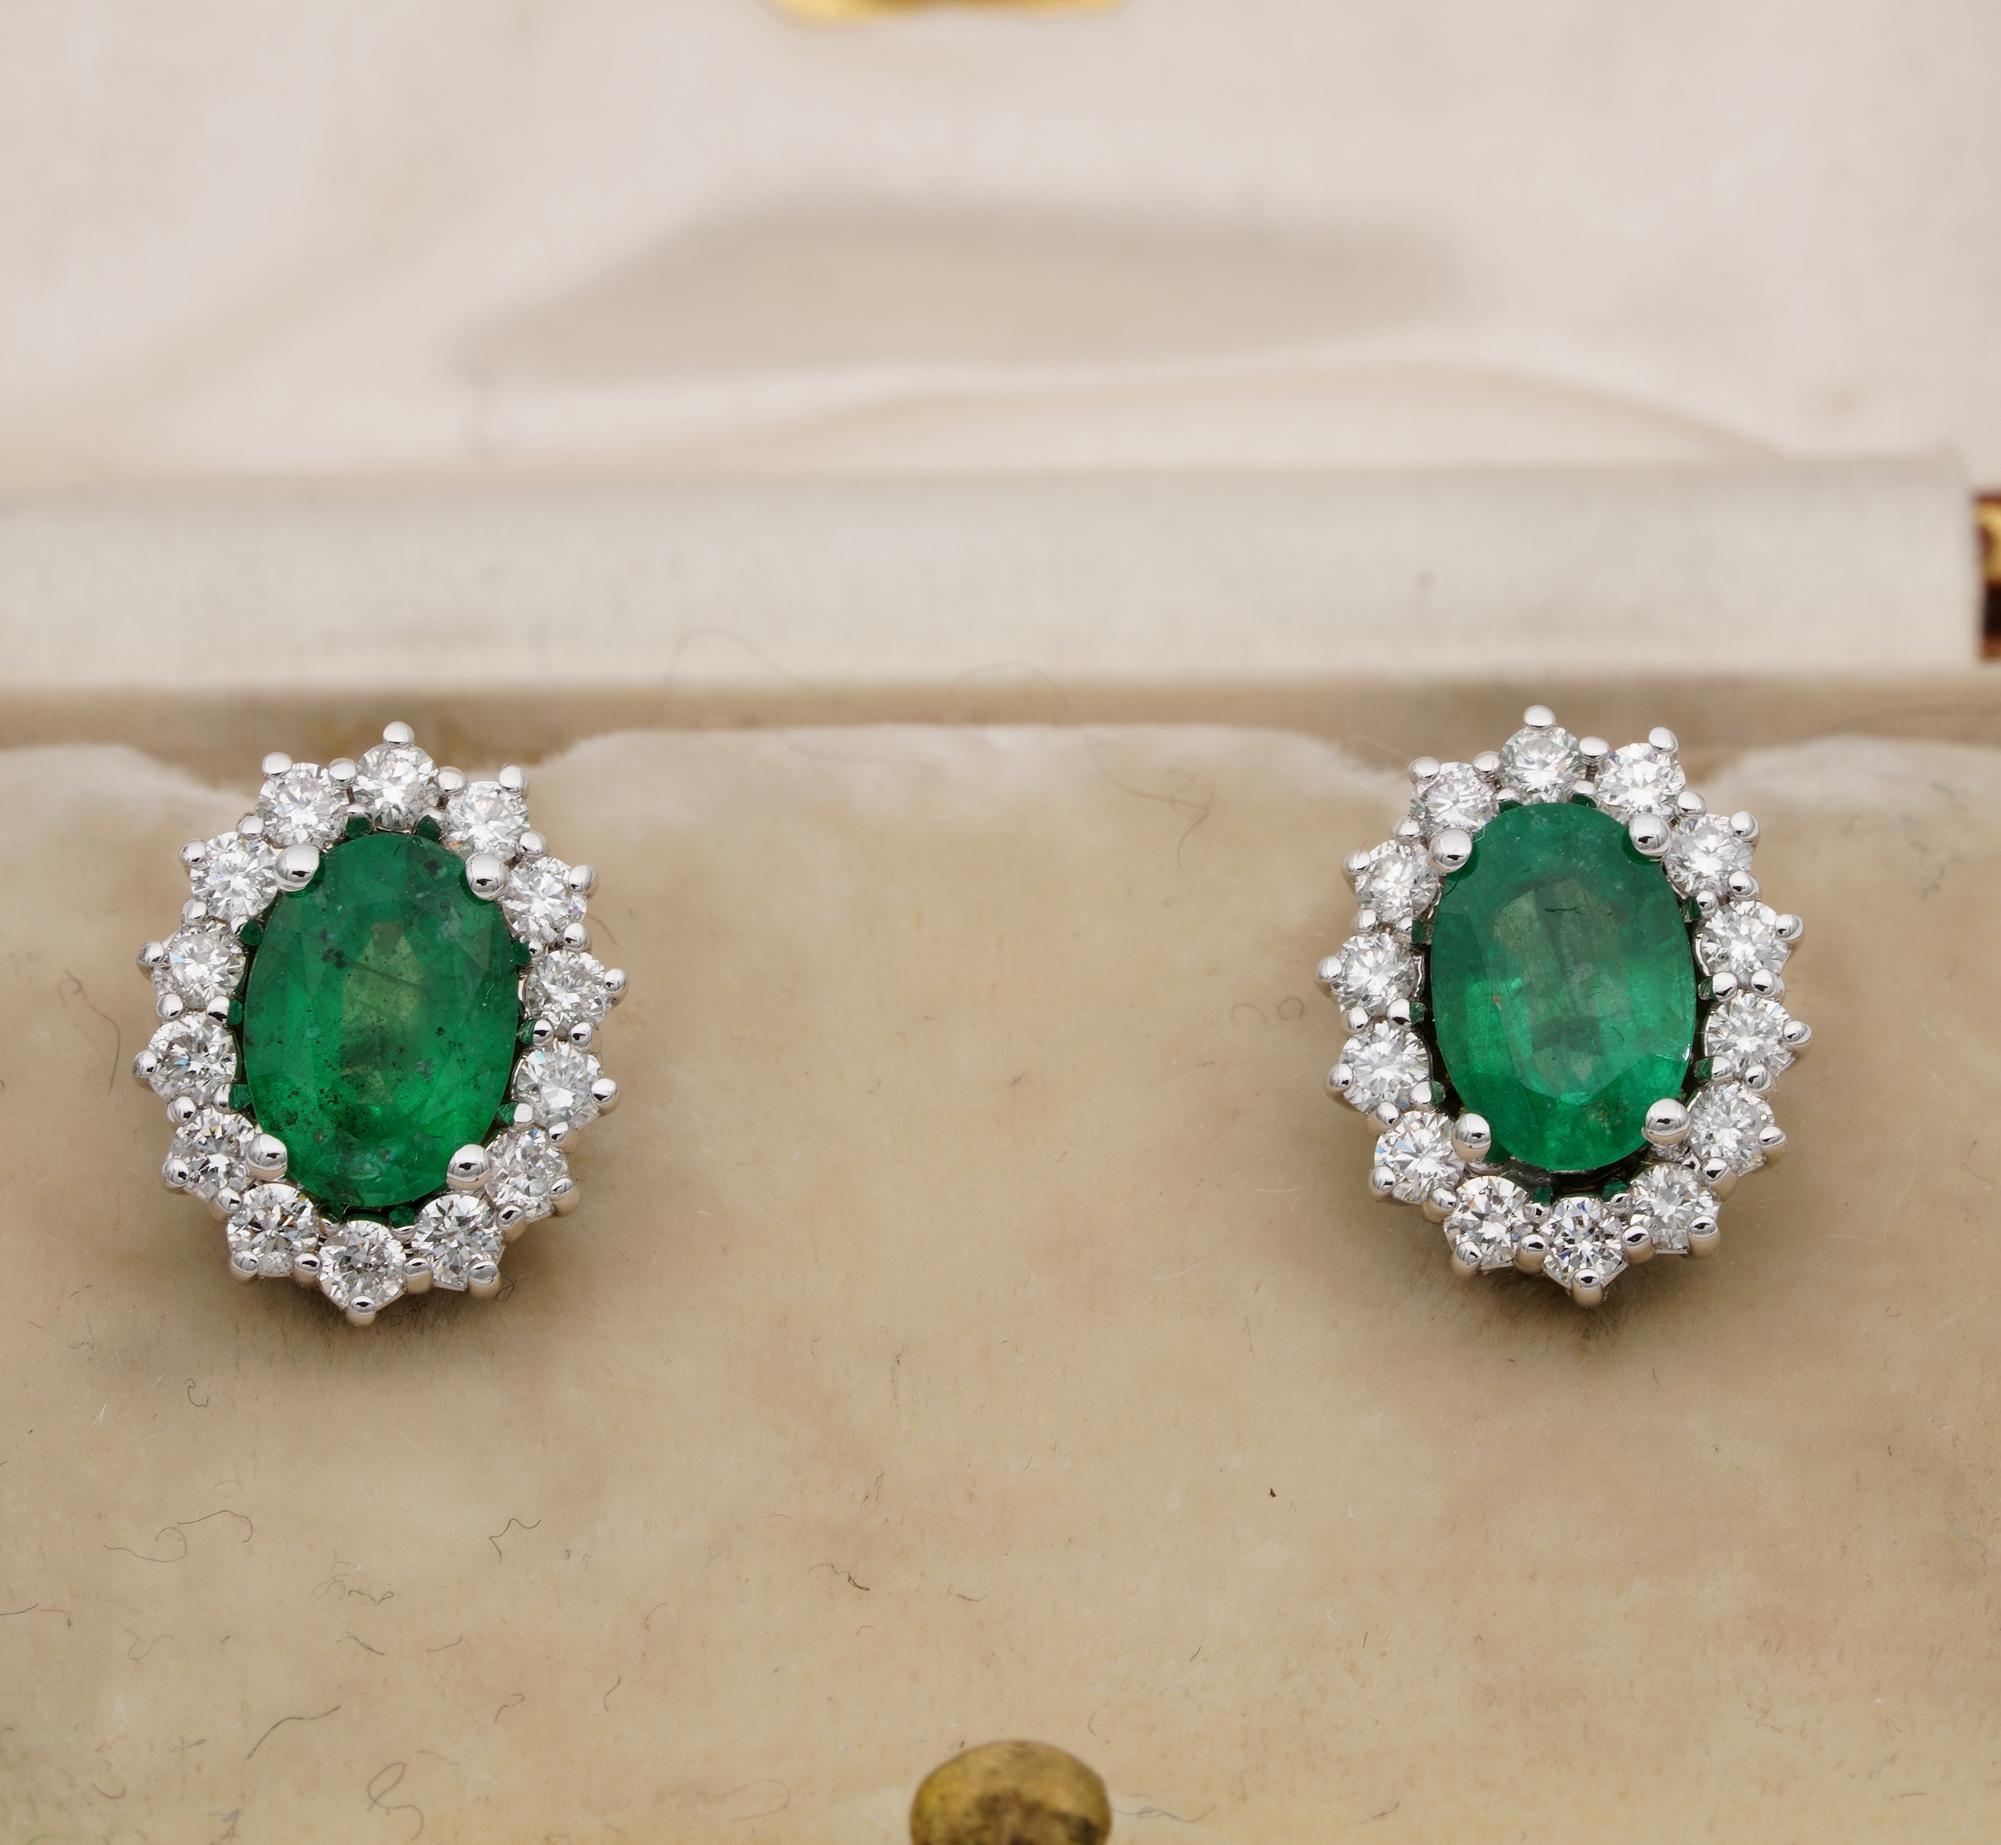 Gorgeous vintage pair of natural Emerald and Diamond earrings in a classy cluster 1970 ca
Hand crafted of solid 18 Kt white gold – tested
Oval shaped set with two natural rich green Emeralds 1.40 Ct with a surround of sparkly round brilliant cut